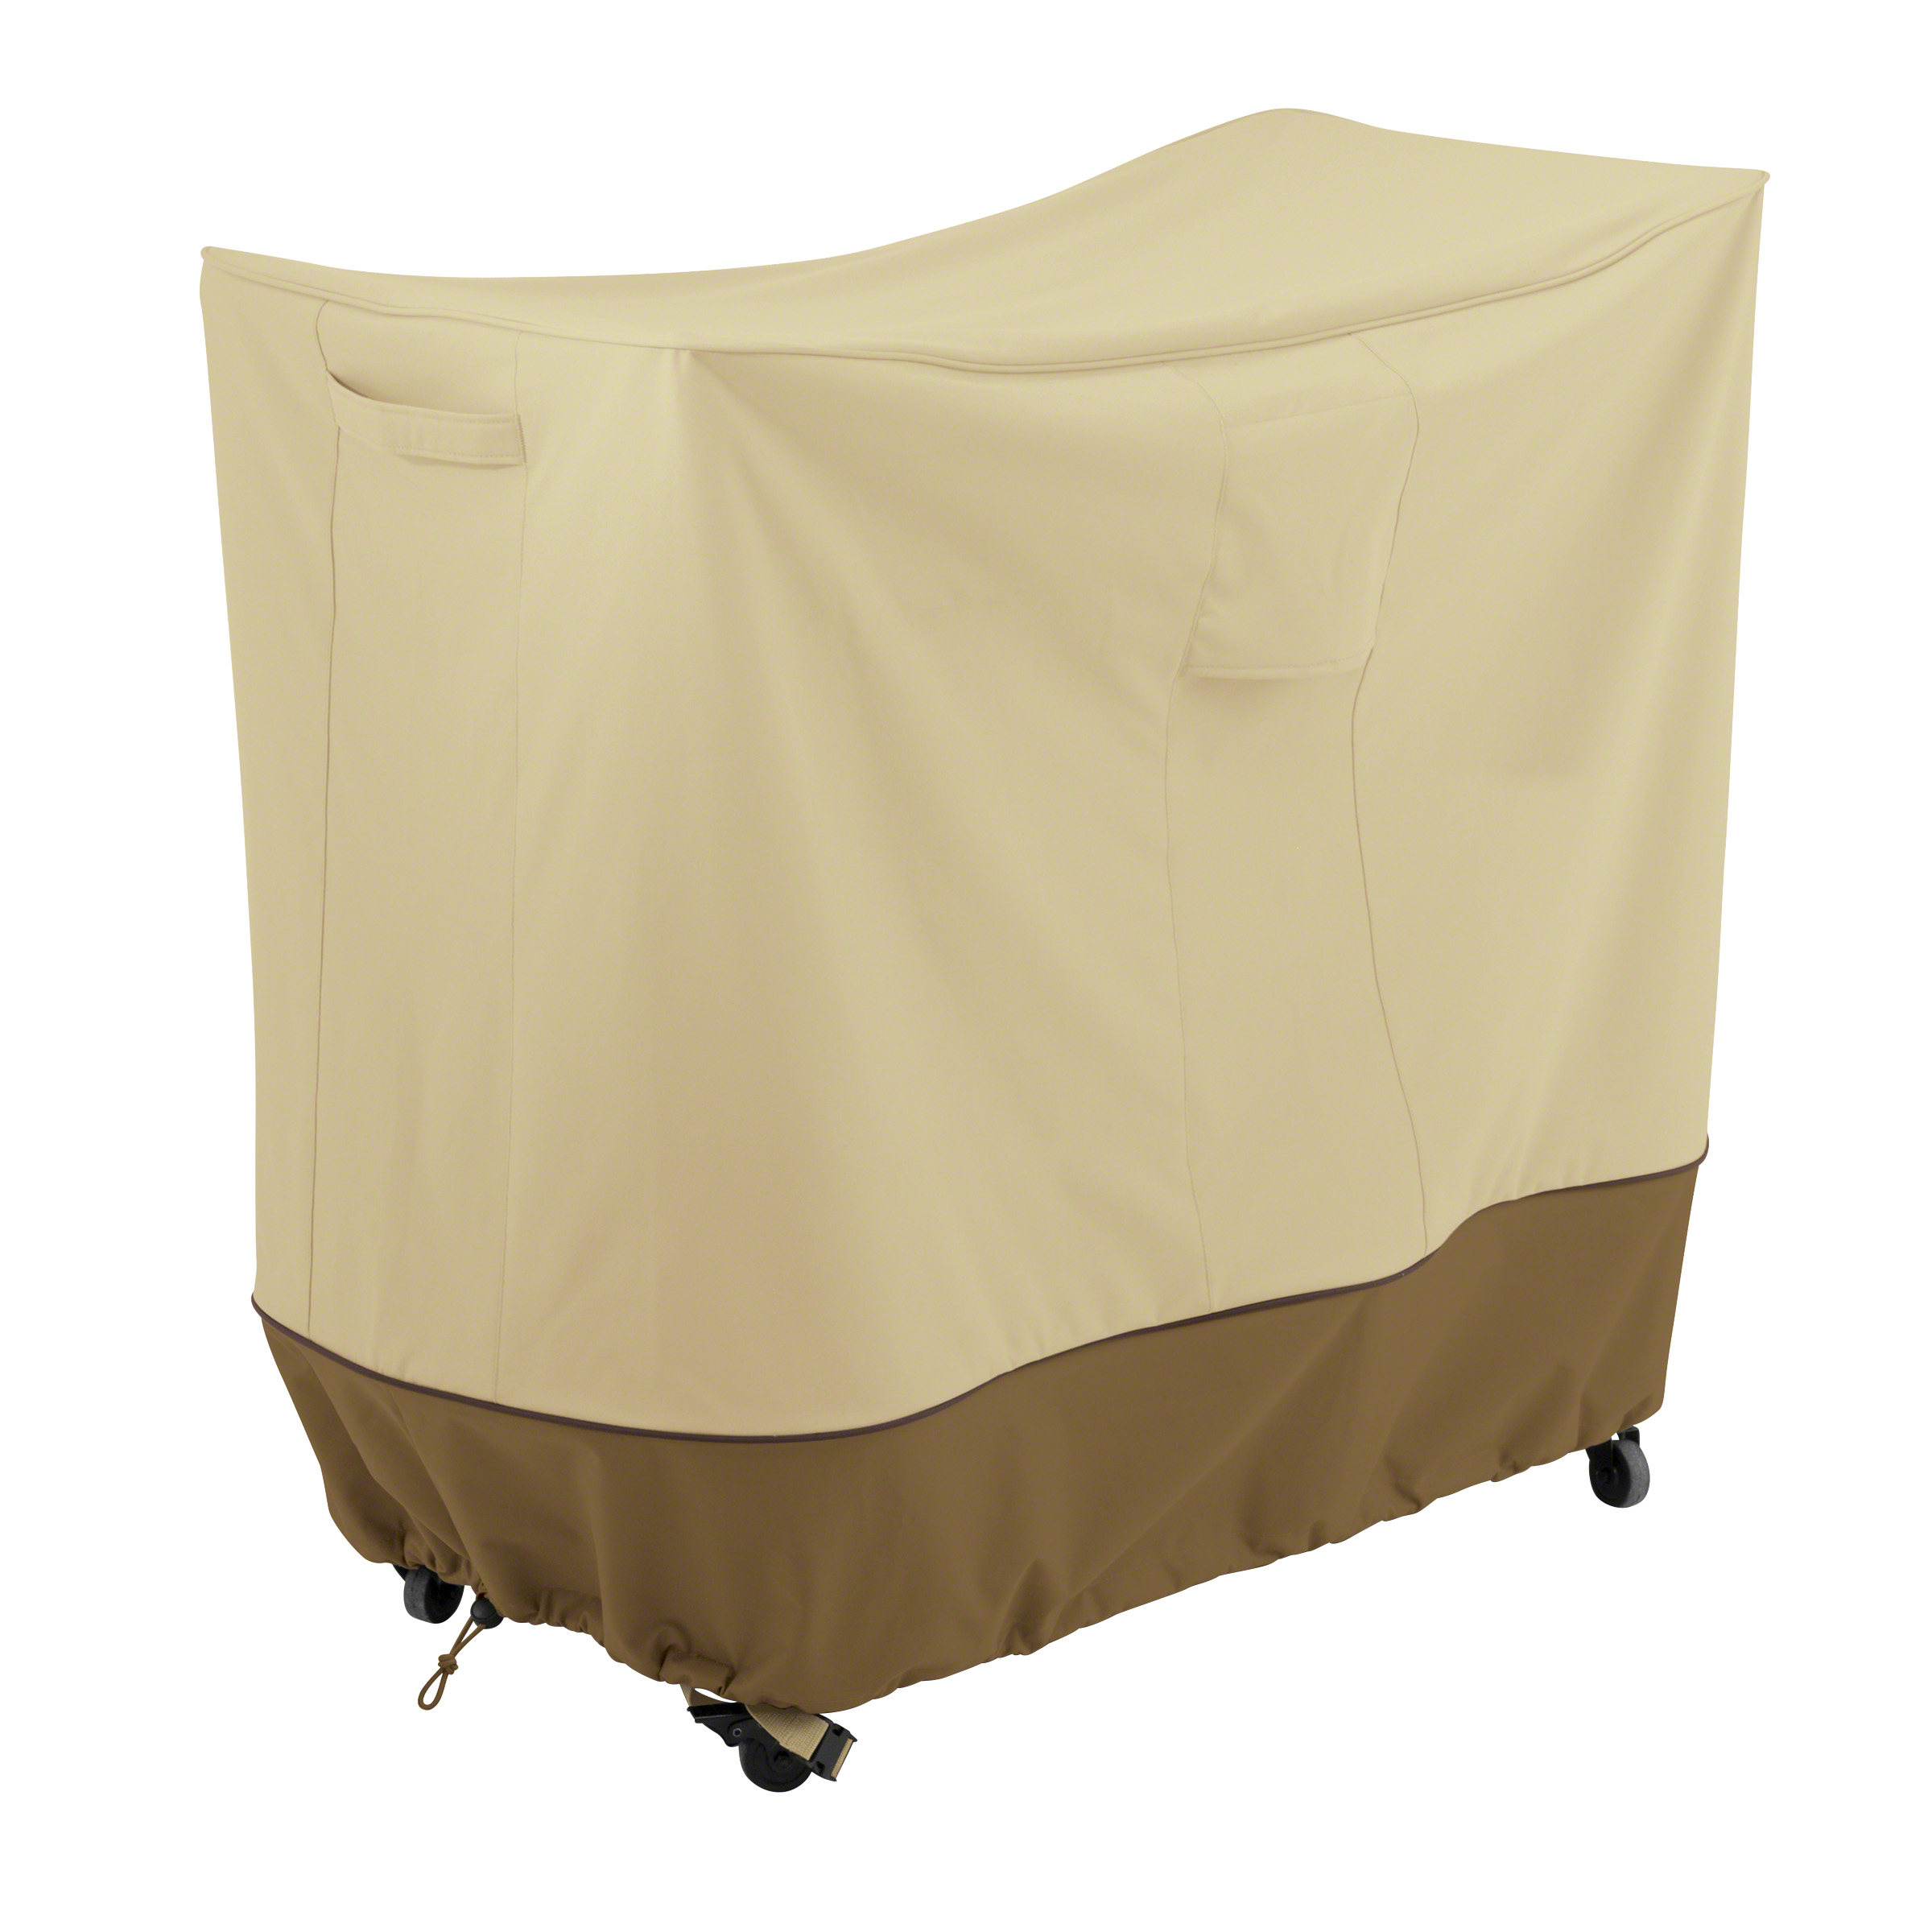 Classic Accessories Veranda Double Handle Bar Cart Cover-Durable and Water Resistant Outdoor Cover